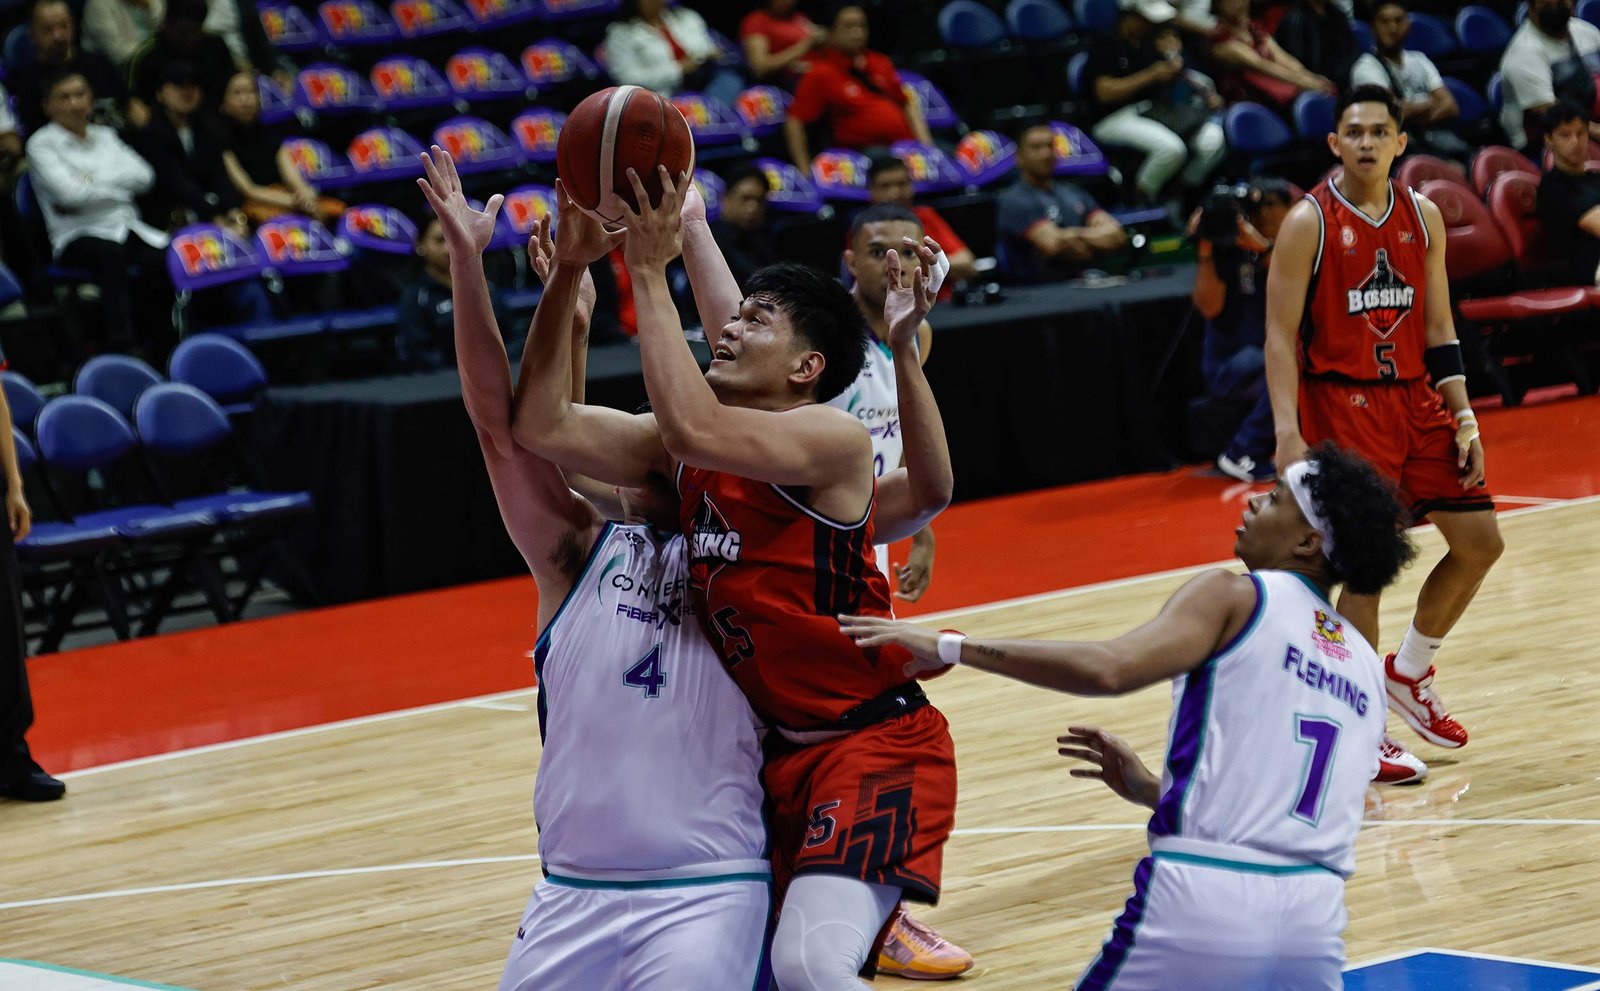 Blackwater routs Converge for promising 3-0 start